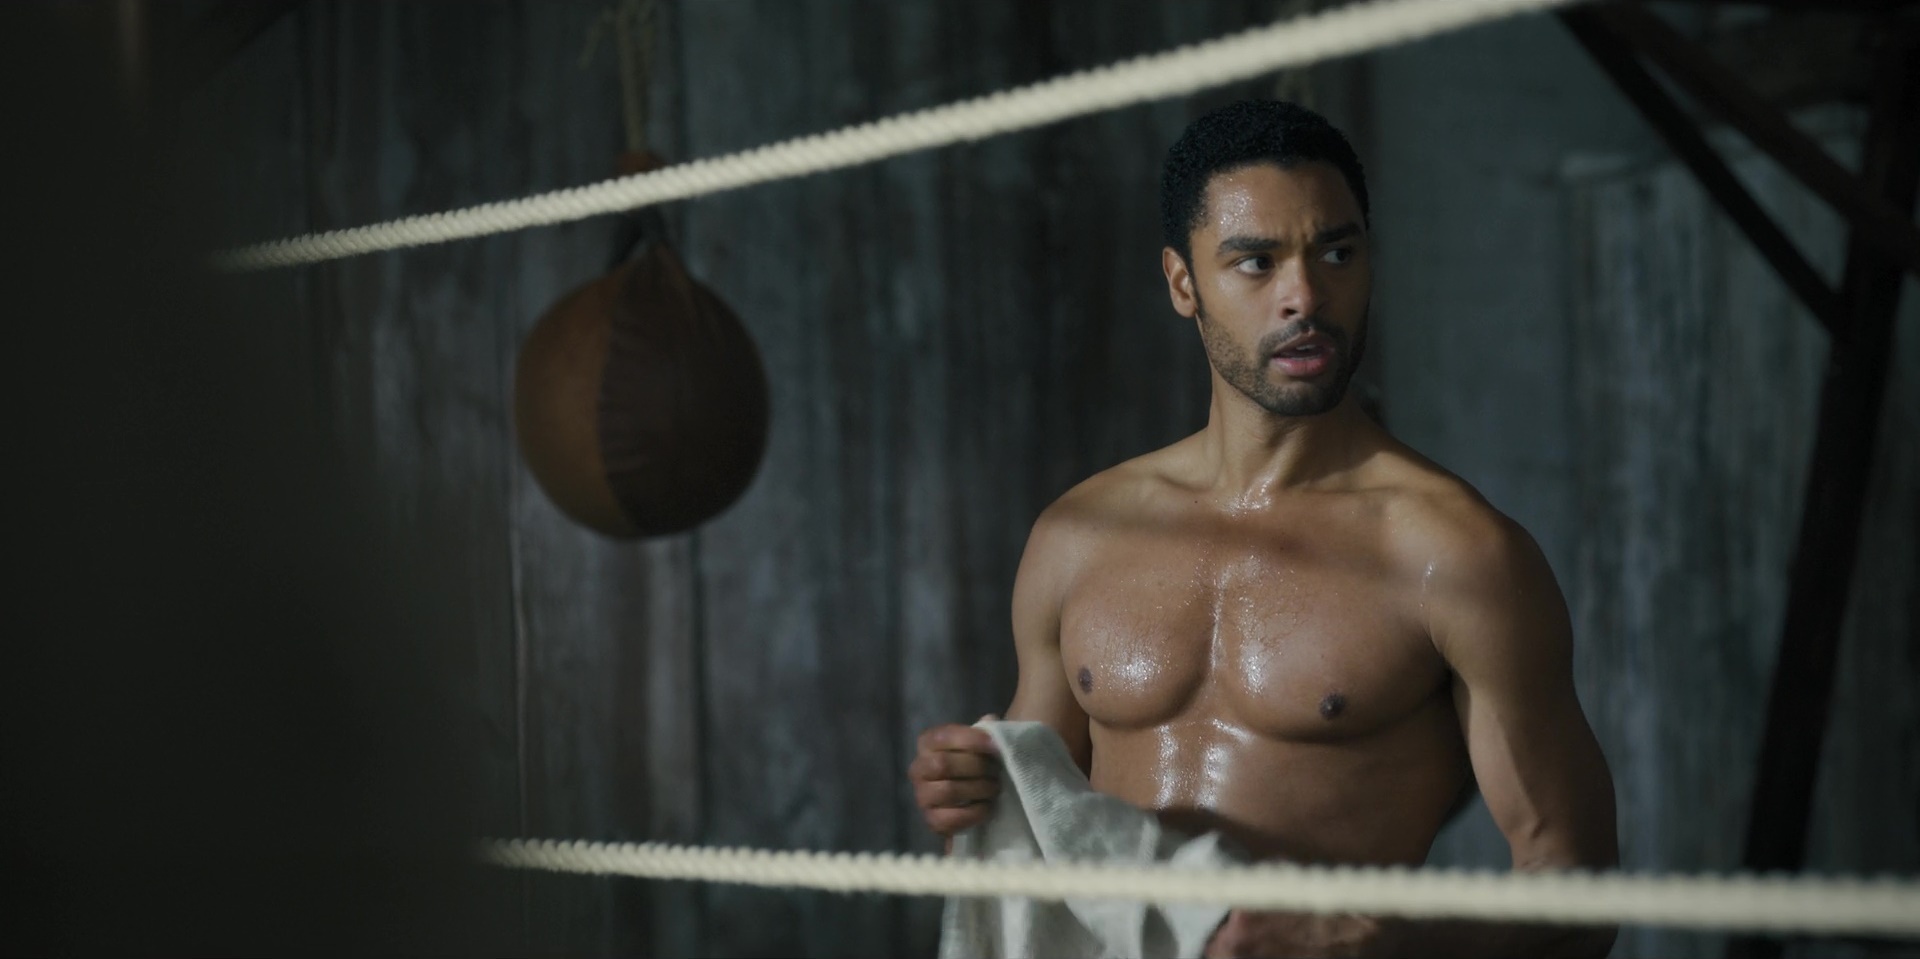 Regé-Jean Page and Martins Imhangbe shirtless in 'Bridgerton' - S...